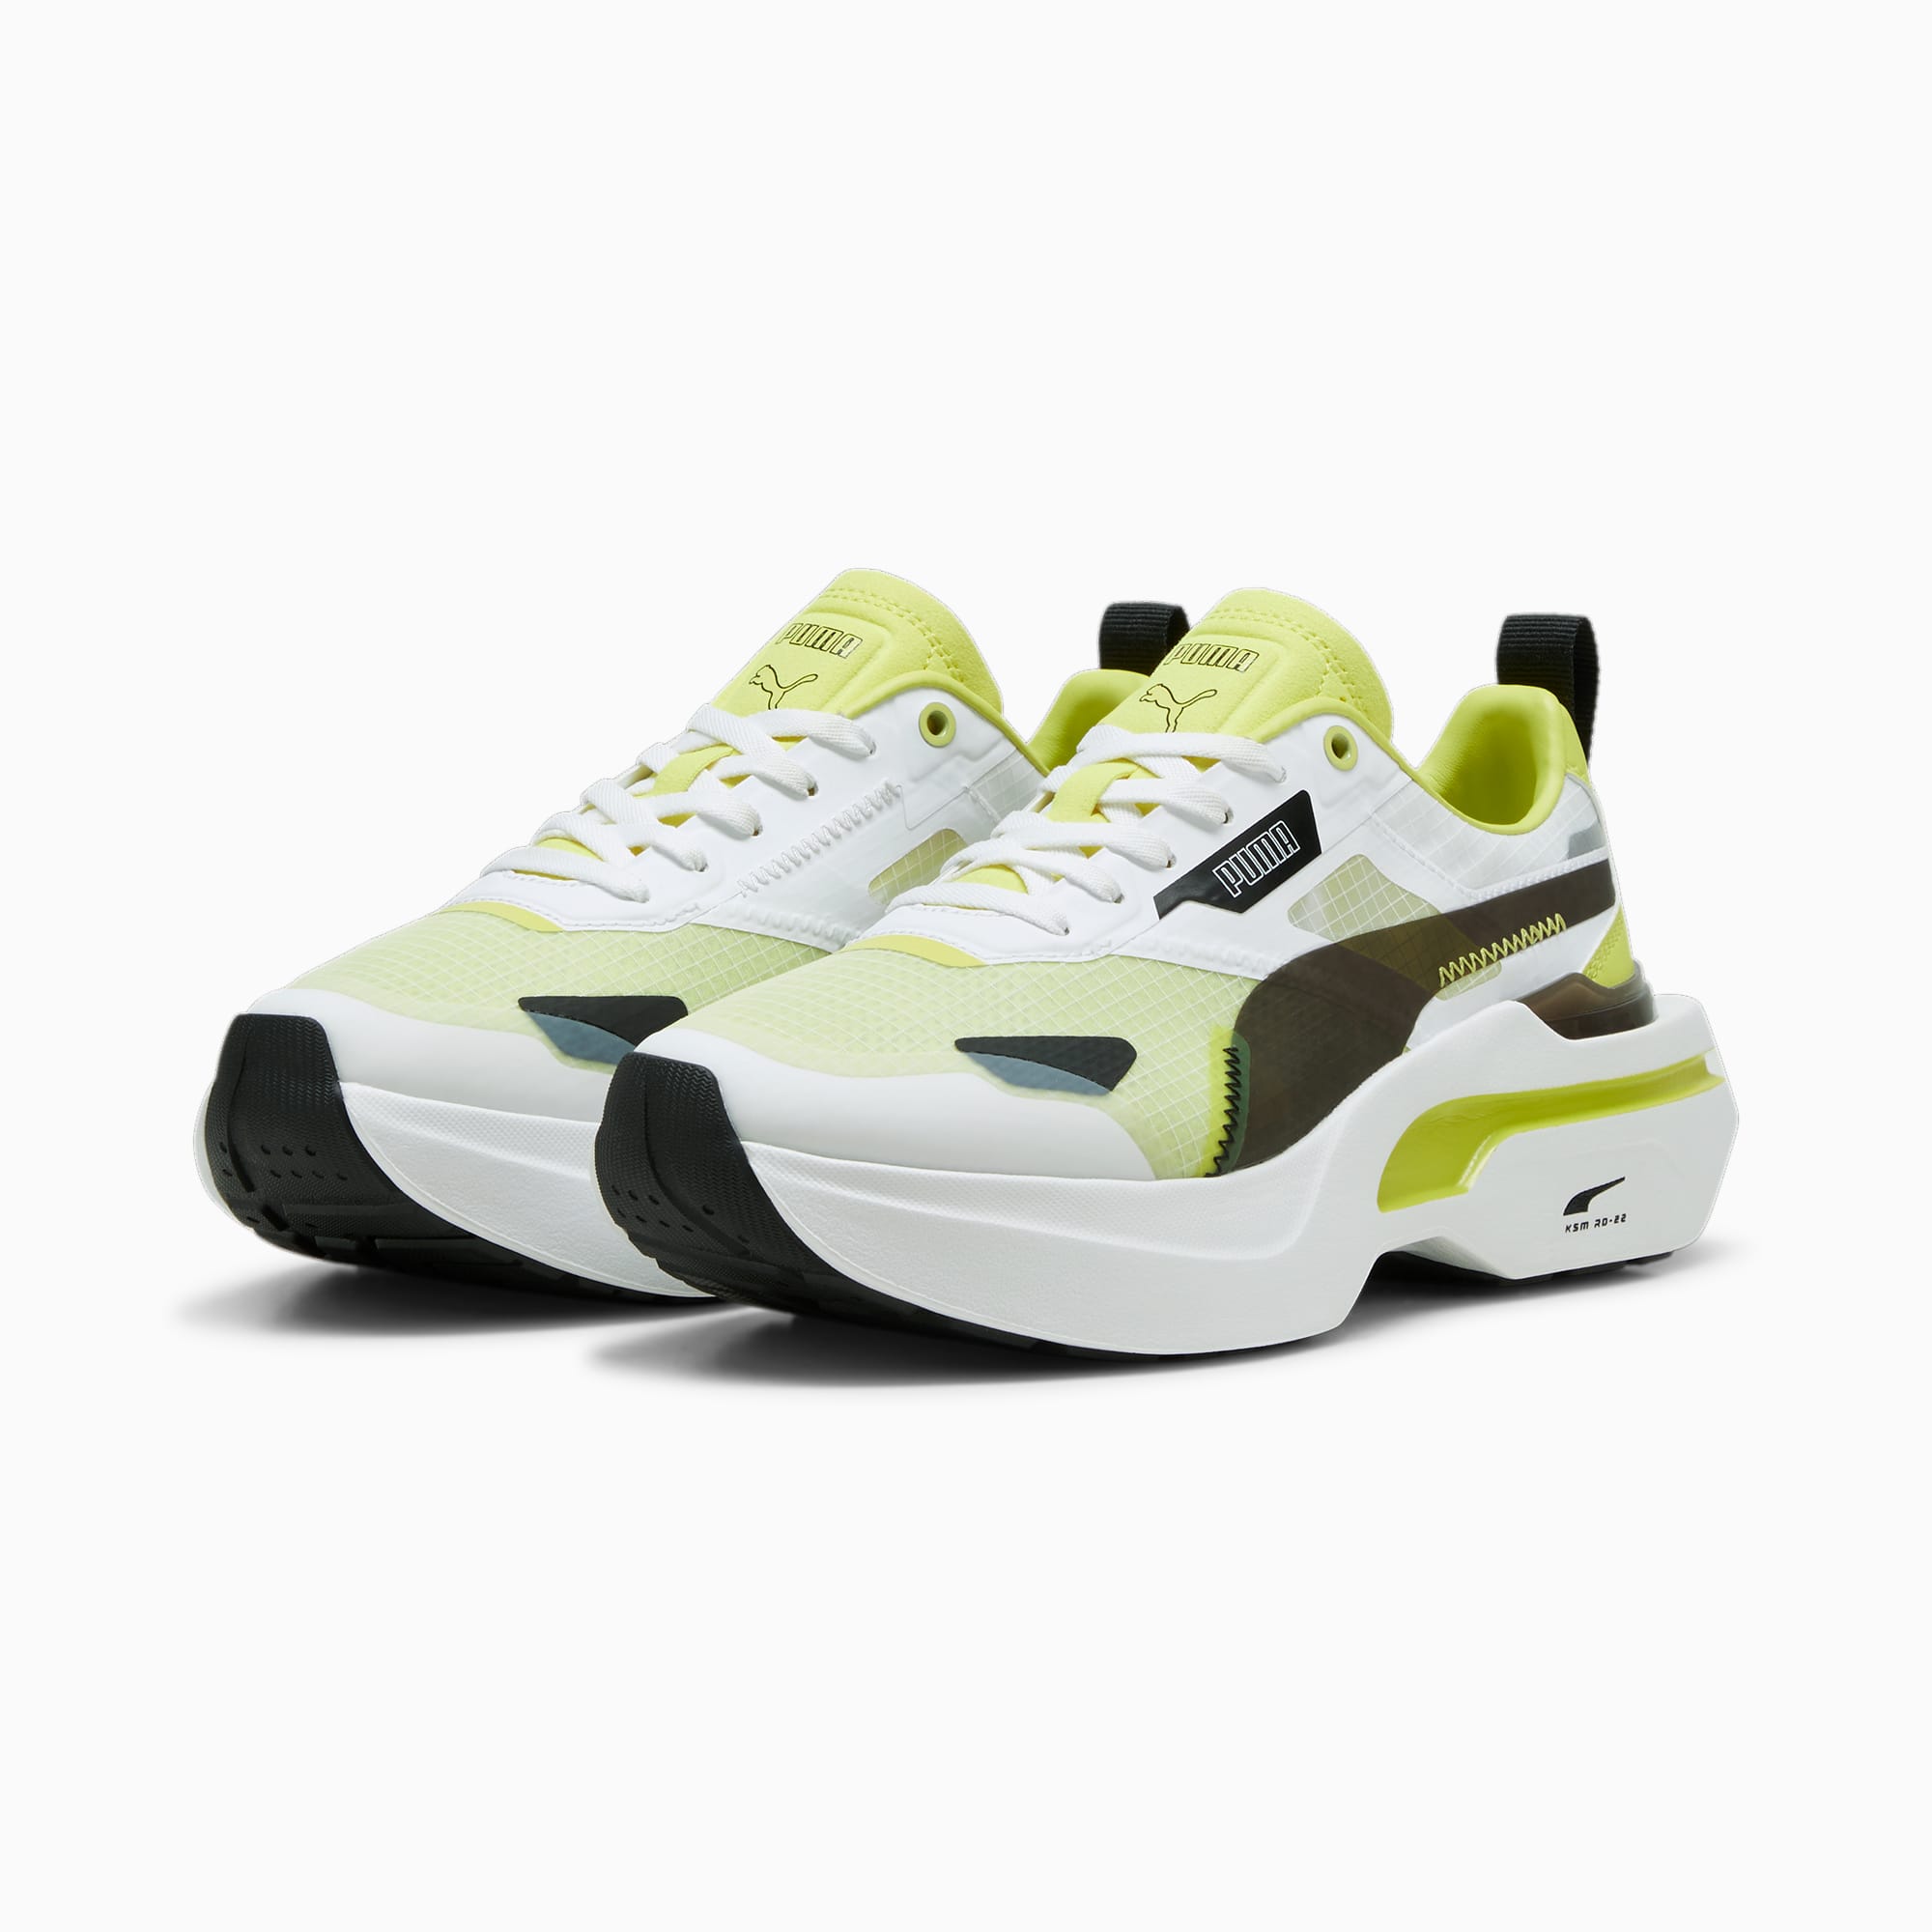 PUMA Kosmo Rider Women's Trainers, White/Lime Sheen, Size 35,5, Shoes